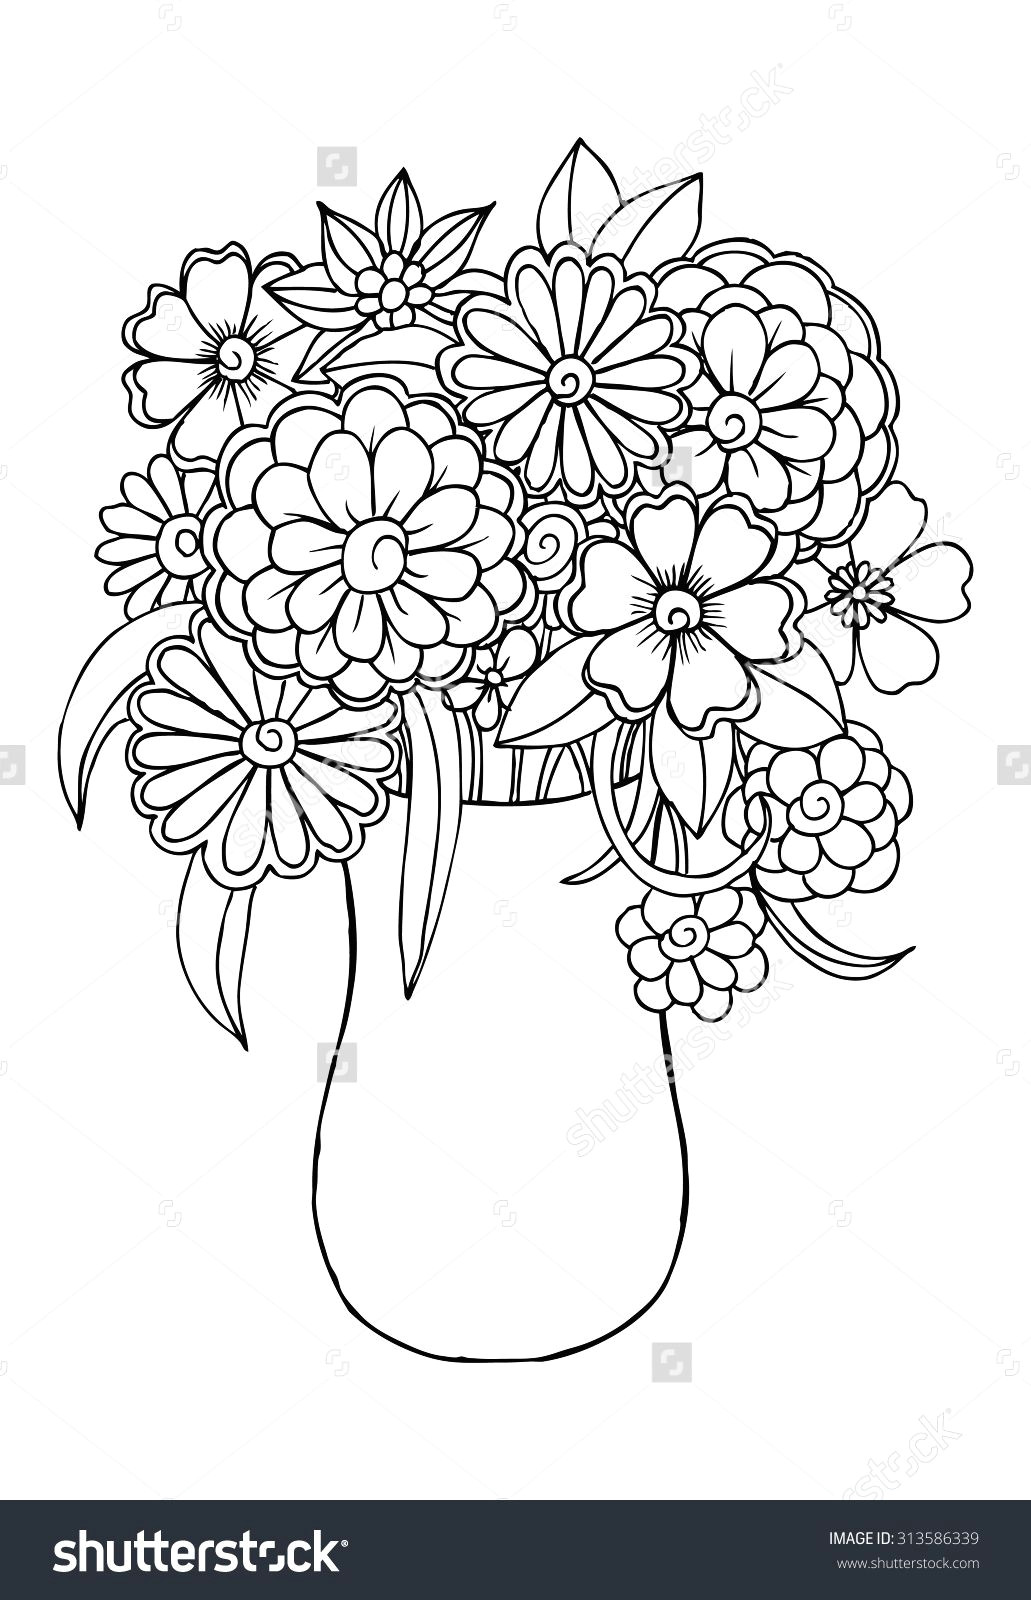 vector bouquet of flowers in a vase adult coloring pages coloring books flower vase